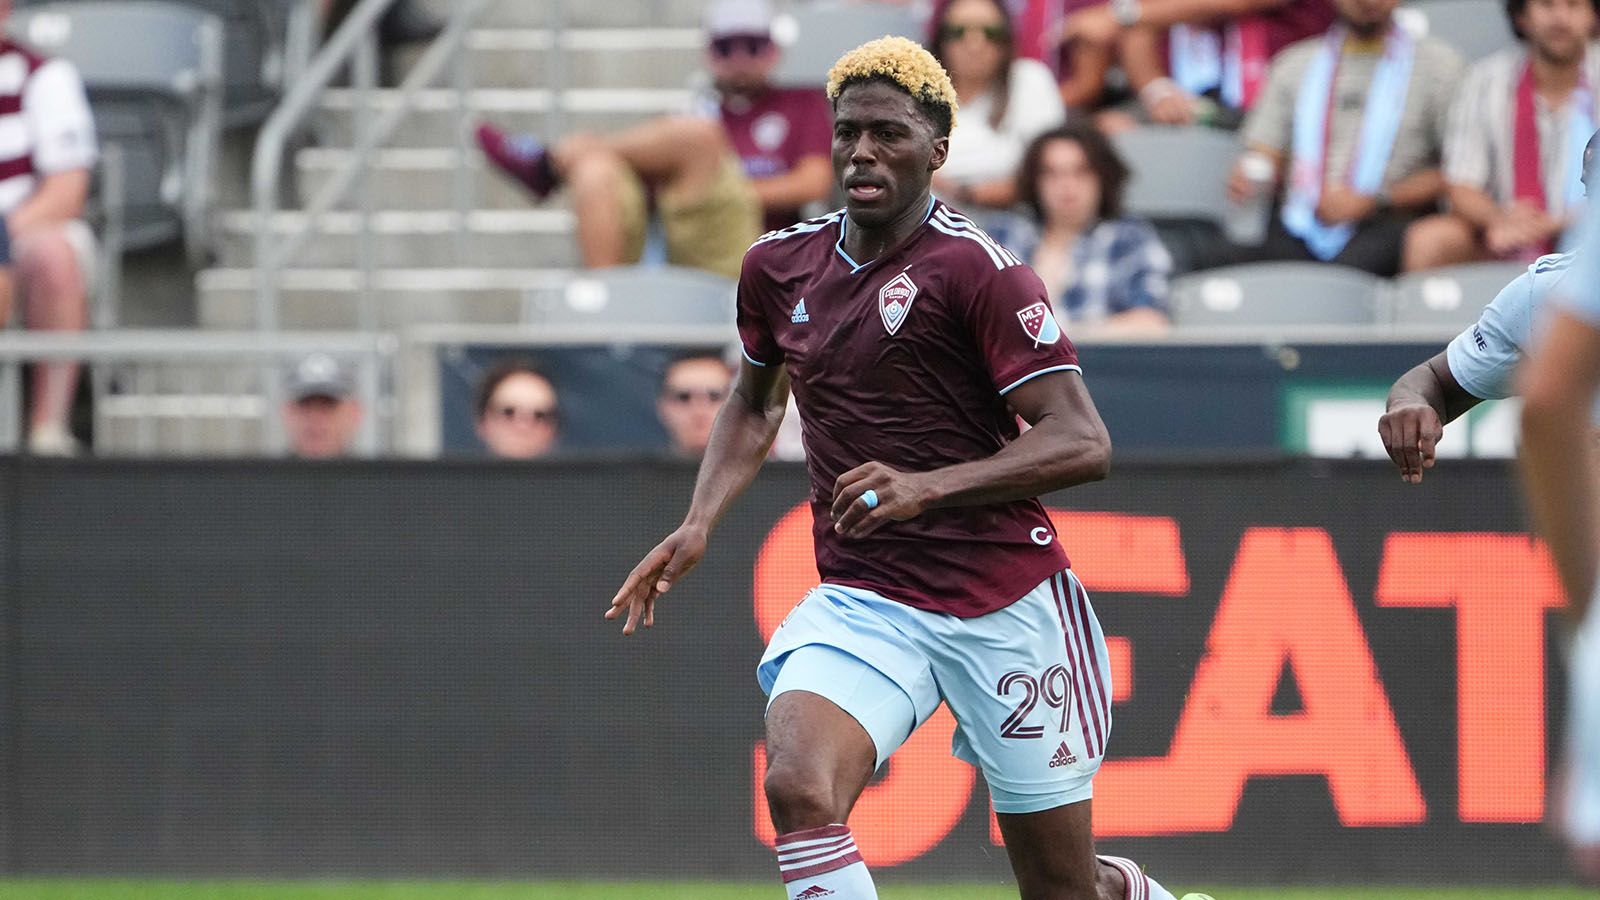 Gyasi Zardes finding his form as Austin FC continues to build momentum